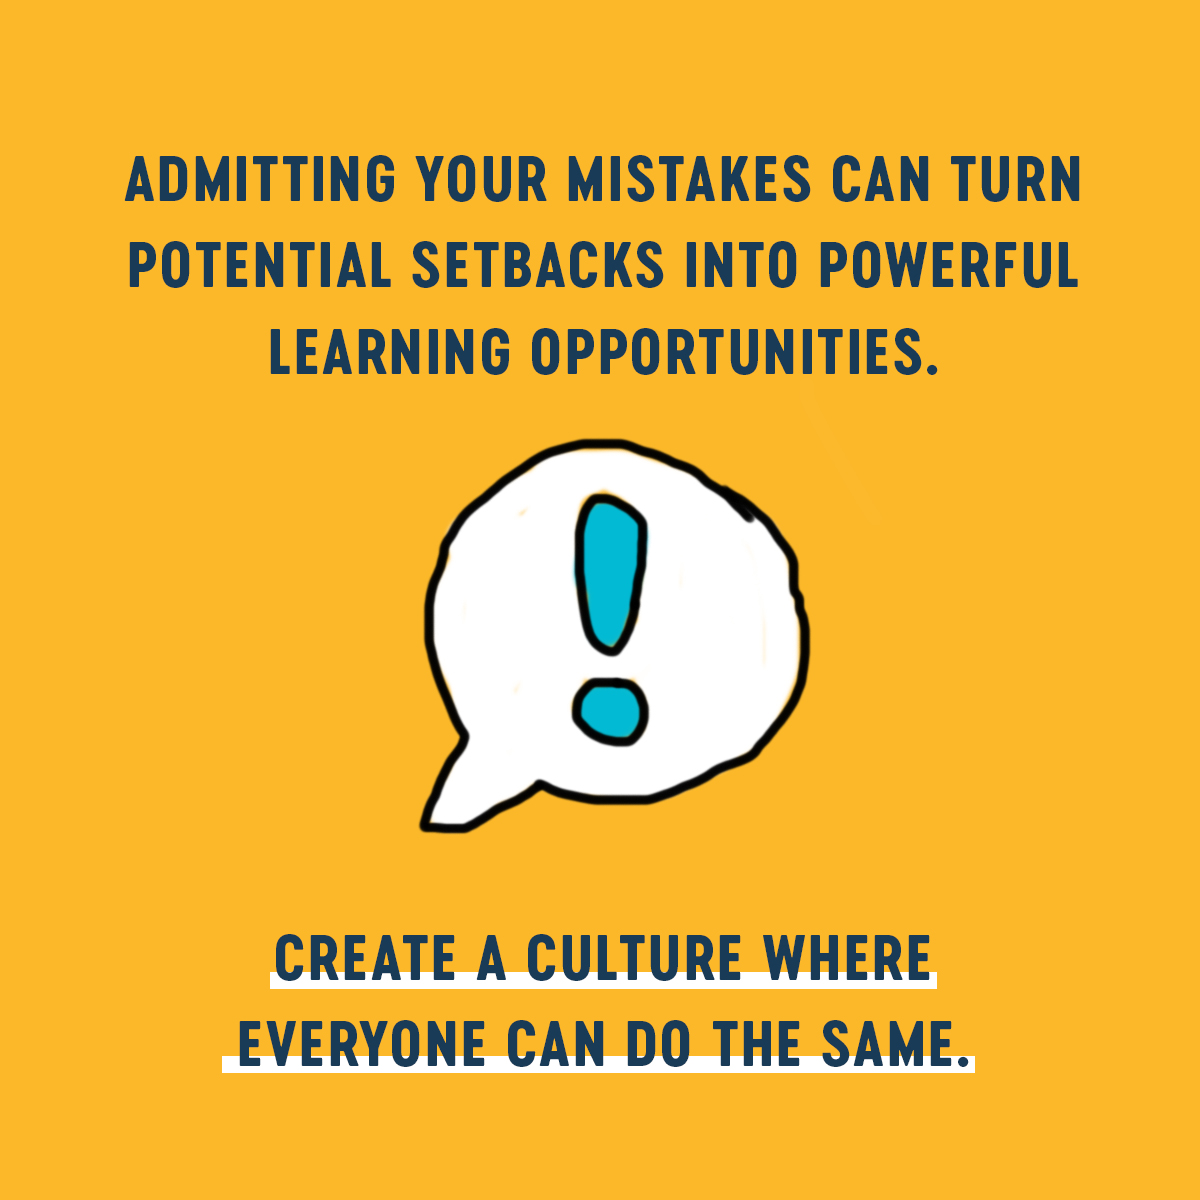 Mistakes are part of growth. Discussing yours openly sets a transparency standard, builds trust, and encourages others to share their own. This creates a culture where innovation thrives on collective improvement, not fear of failure. #Multipliers